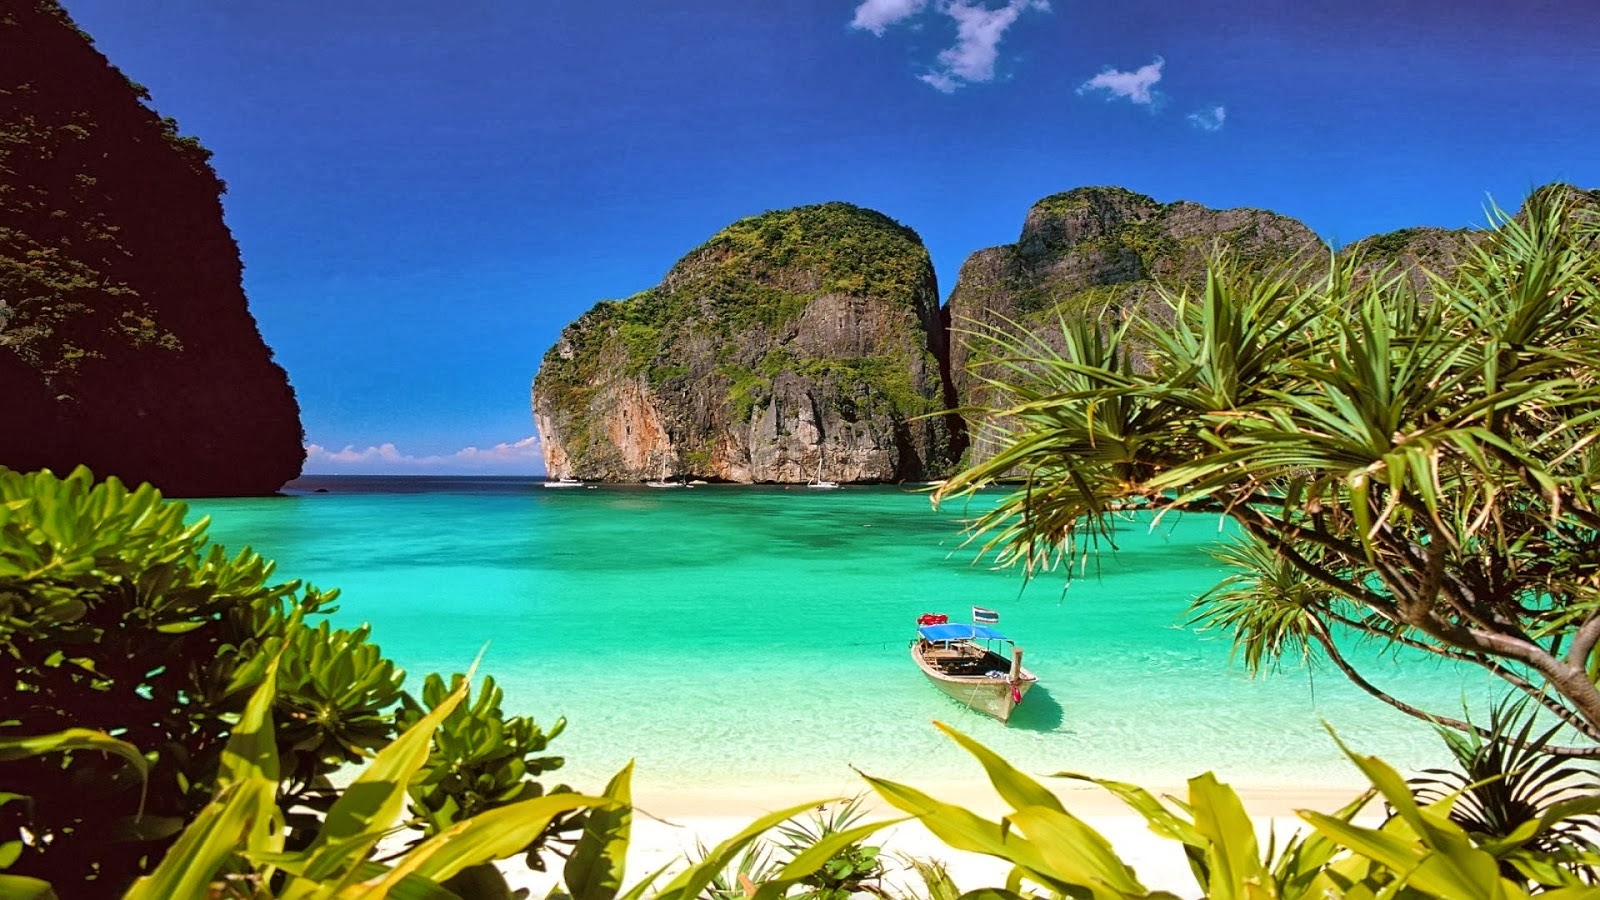 HD WALLPAPERS: Download Thailand Beach HD Wallpapers